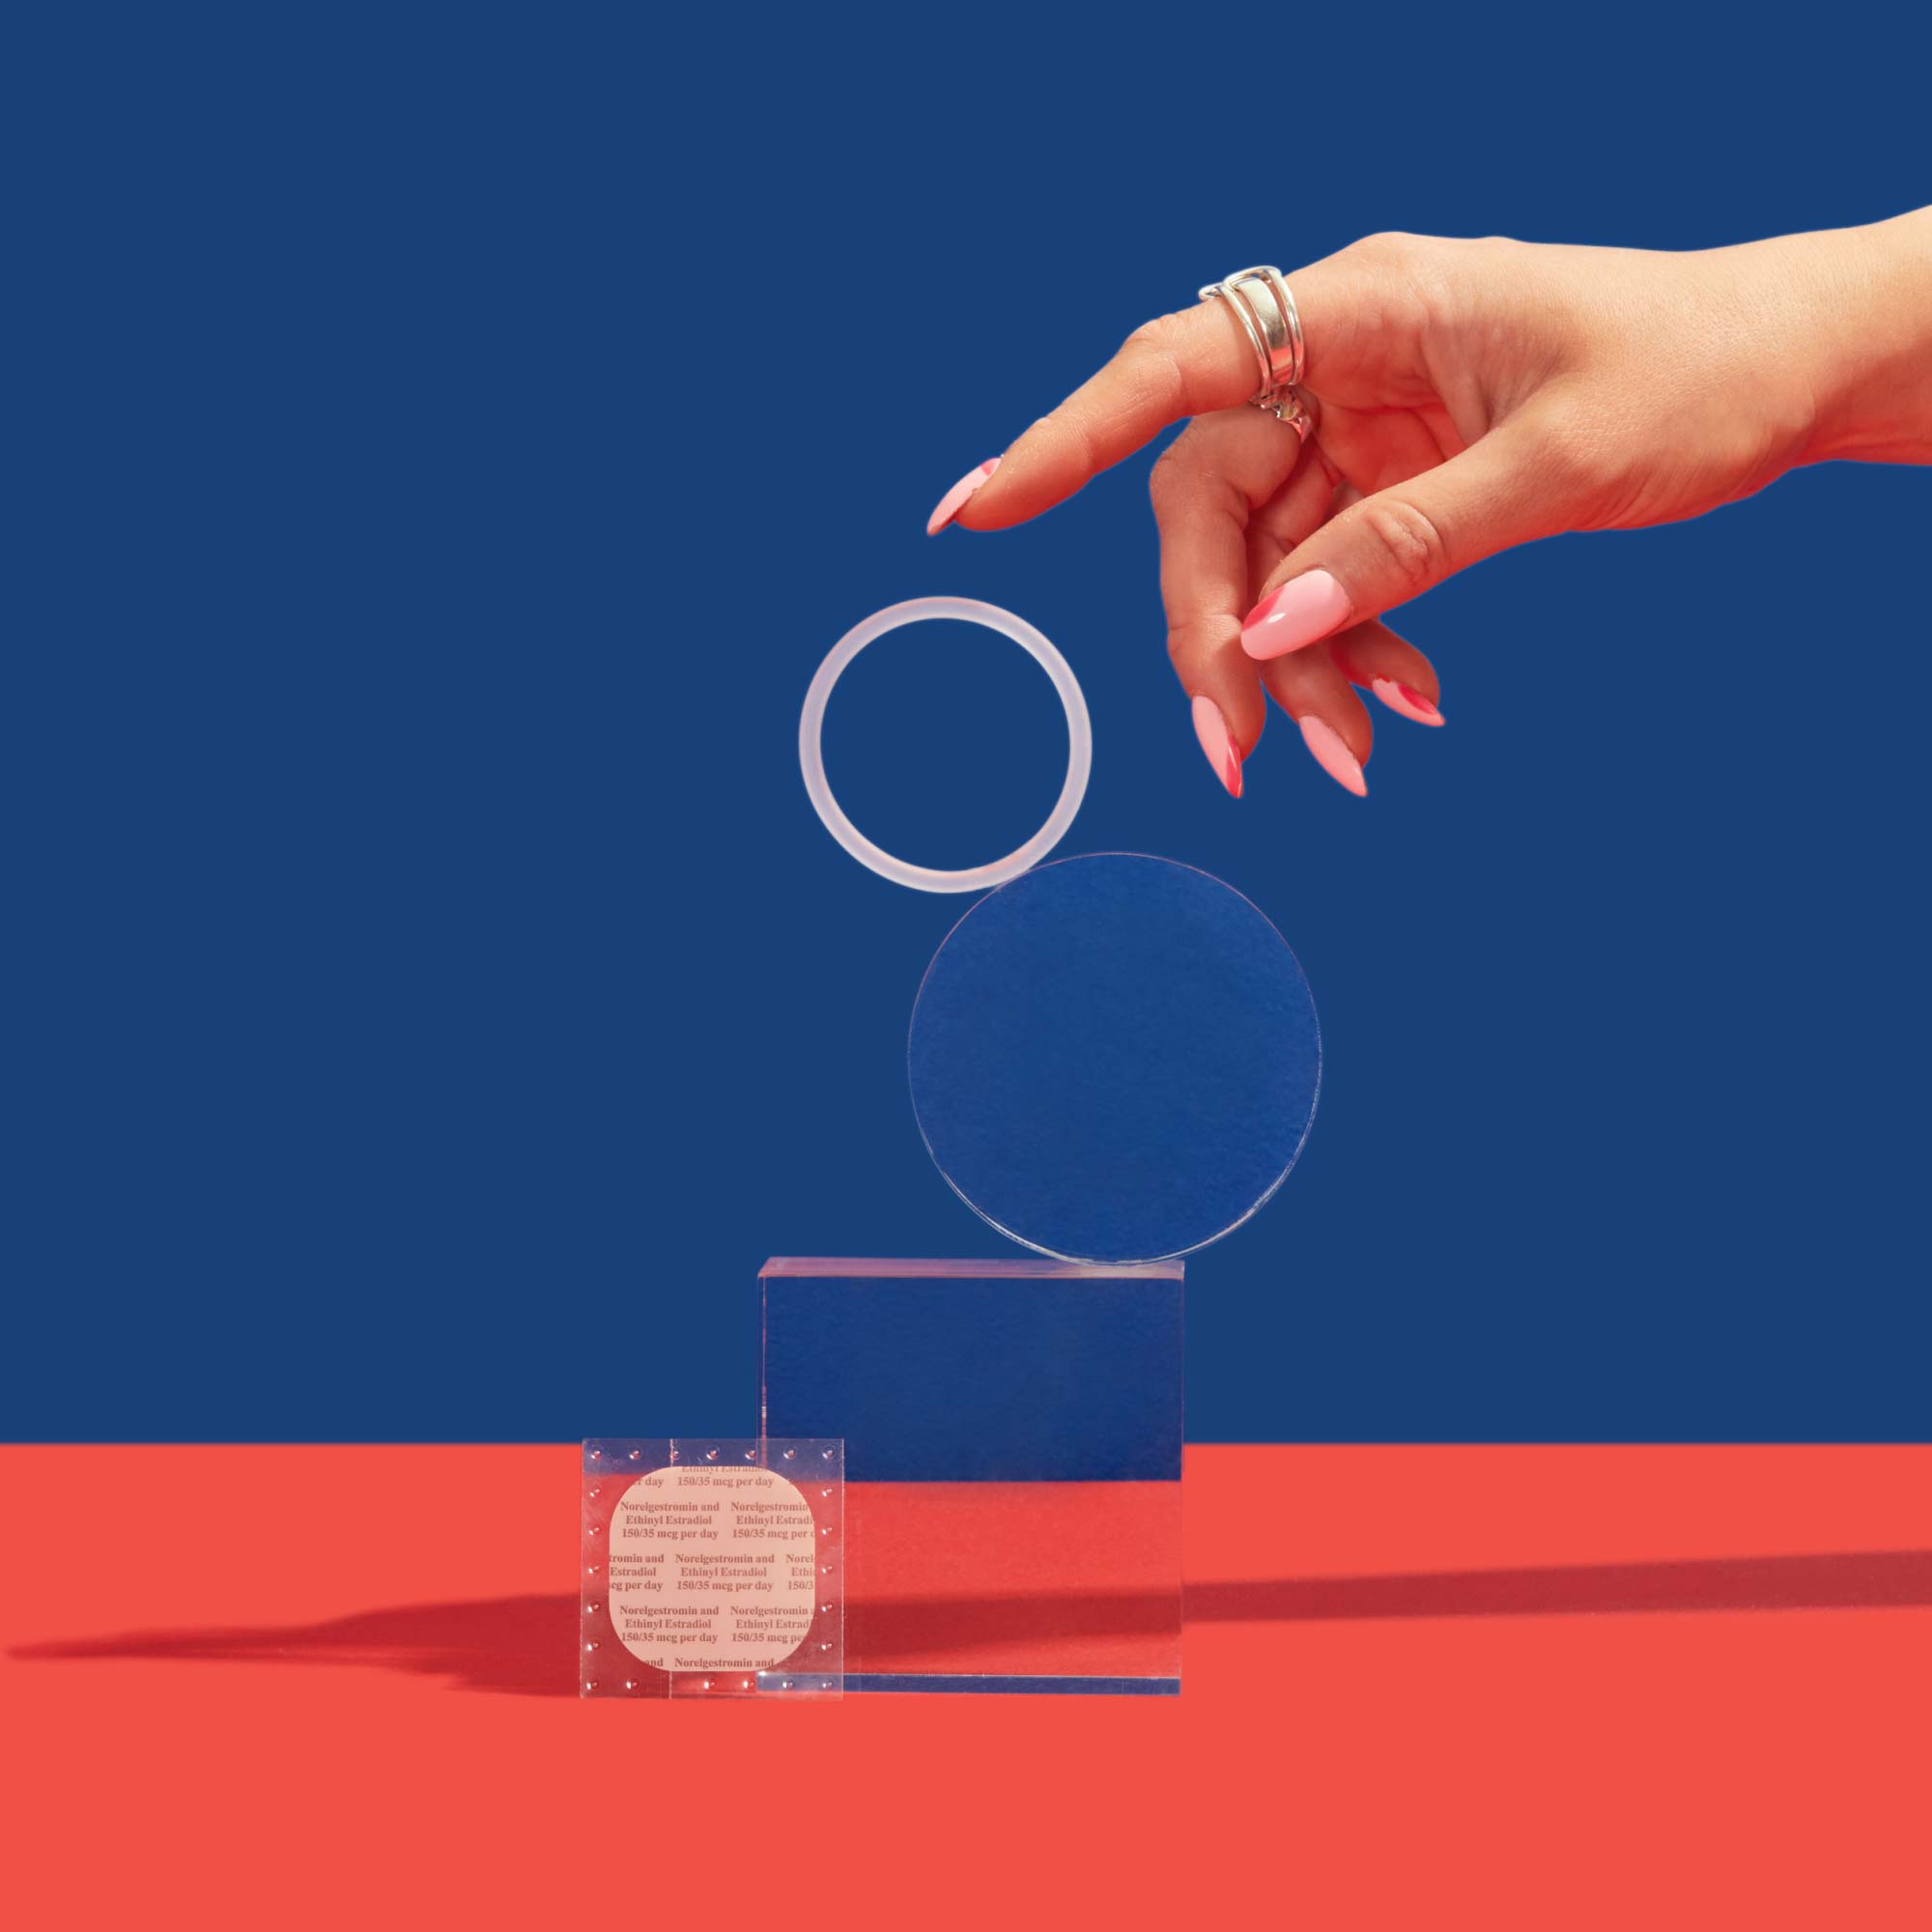 A woman's hand reaching for NuvaRing balanced on clear abstract shapes with the birth control patch on a red surface with a blue background